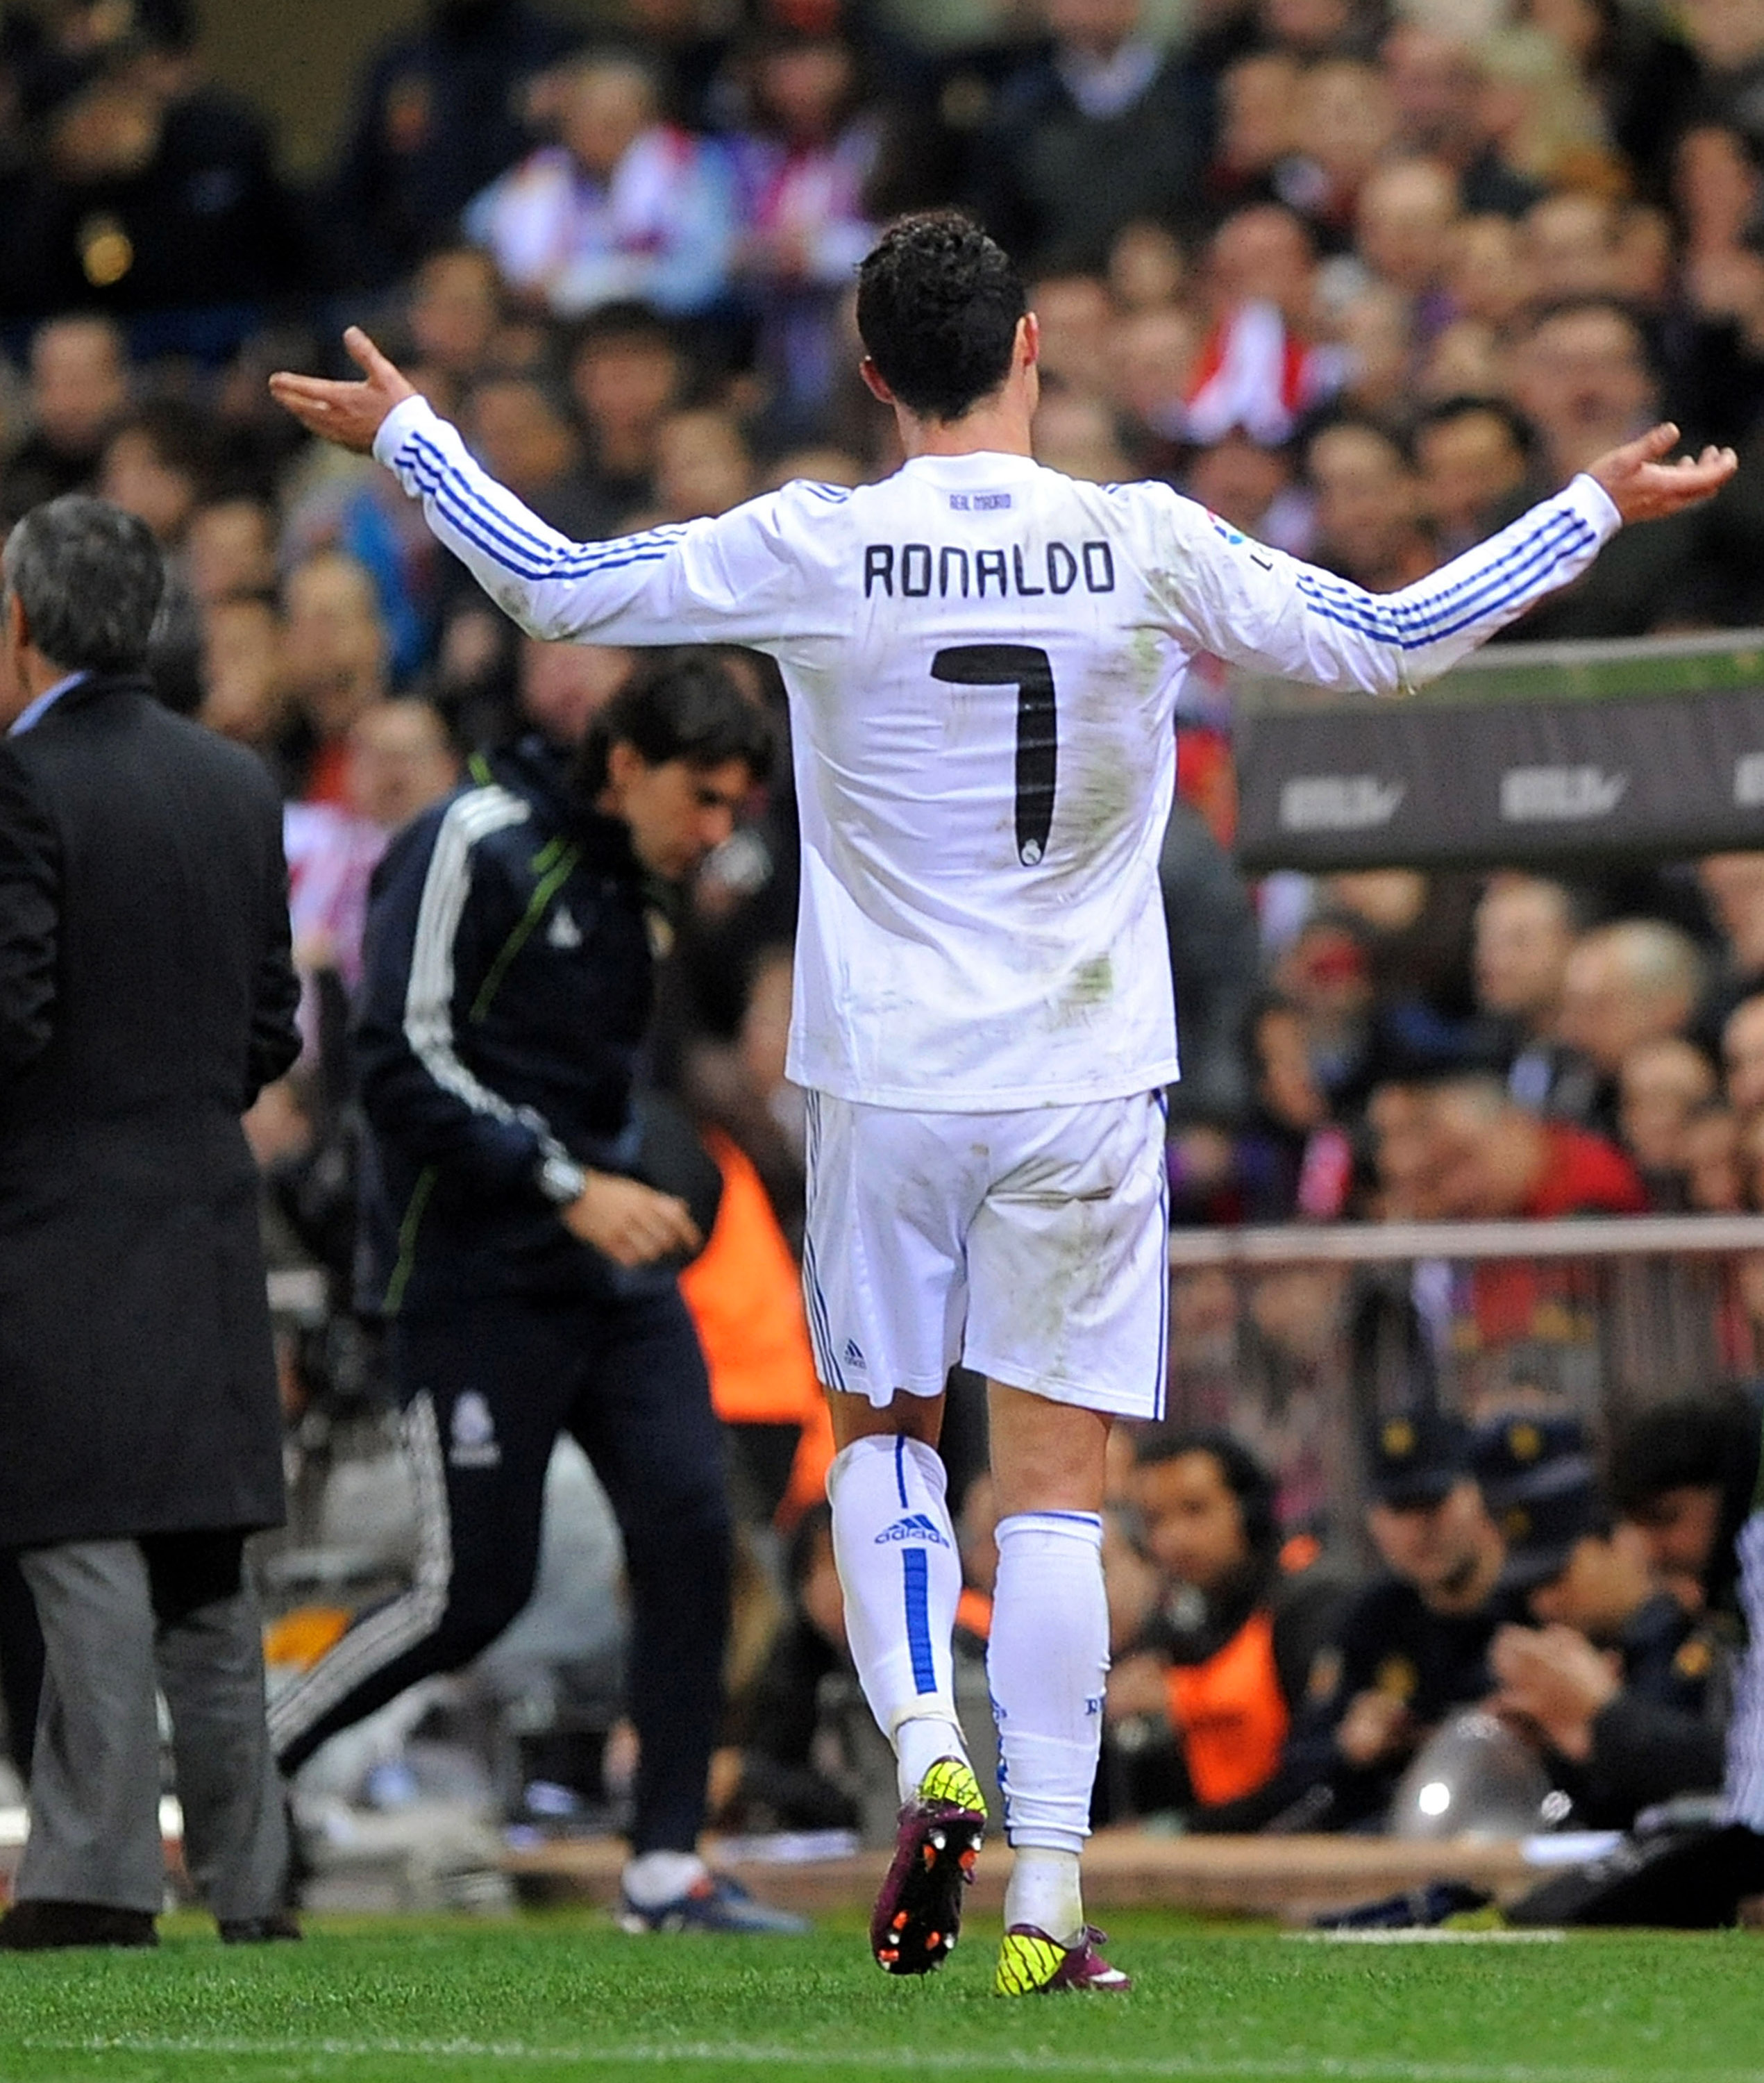 MADRID, SPAIN - MARCH 19: Cristiano Ronaldo of Real Madrid reacts while being substituted during the La Liga match between Atletico Madrid and Real Madrid at Vicente Calderon Stadium on March 19, 2011 in Madrid, Spain.  (Photo by Denis Doyle/Getty Images)